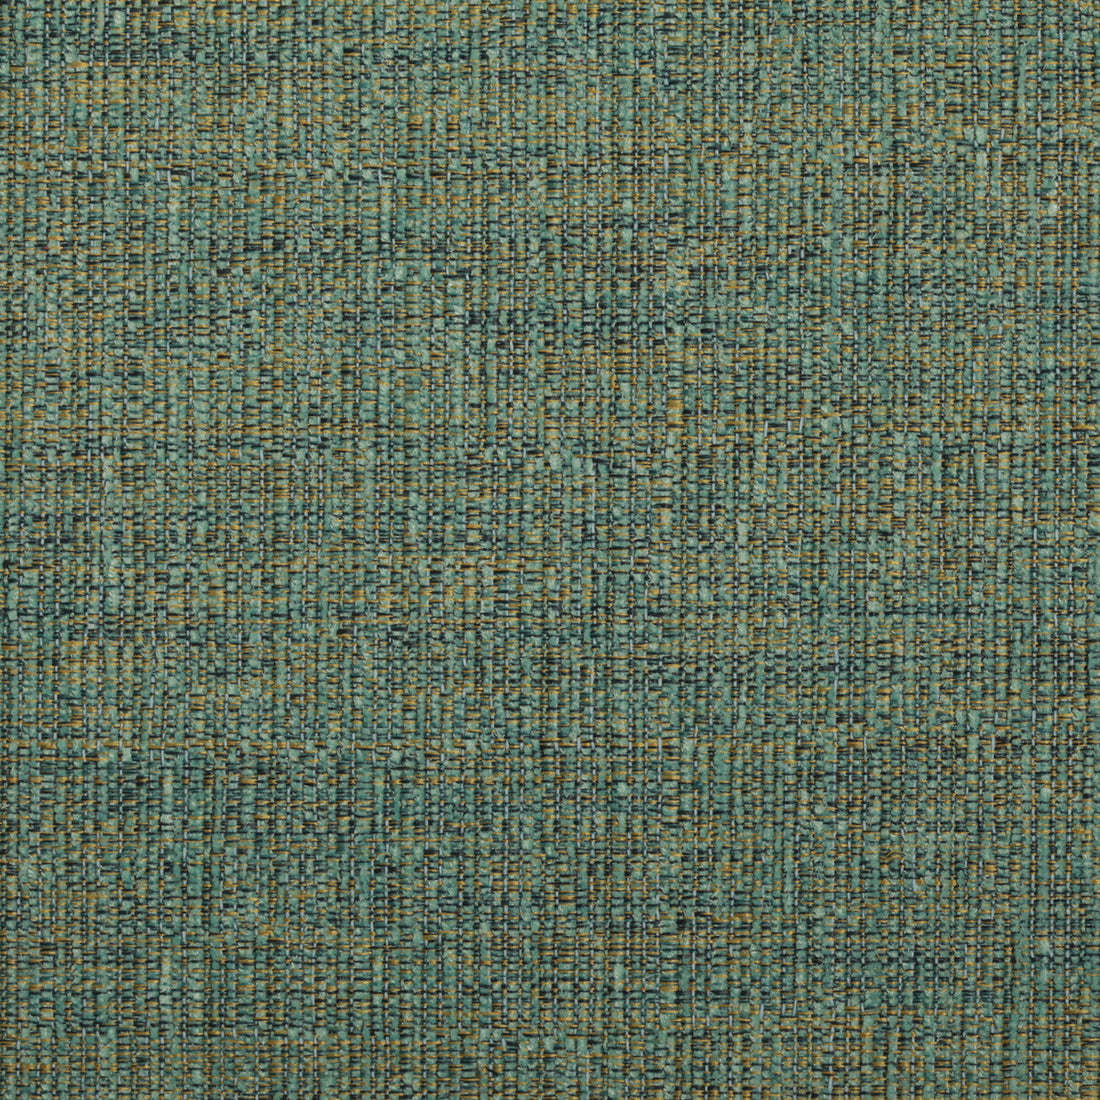 Kravet Contract fabric in 35128-135 color - pattern 35128.135.0 - by Kravet Contract in the Crypton Incase collection